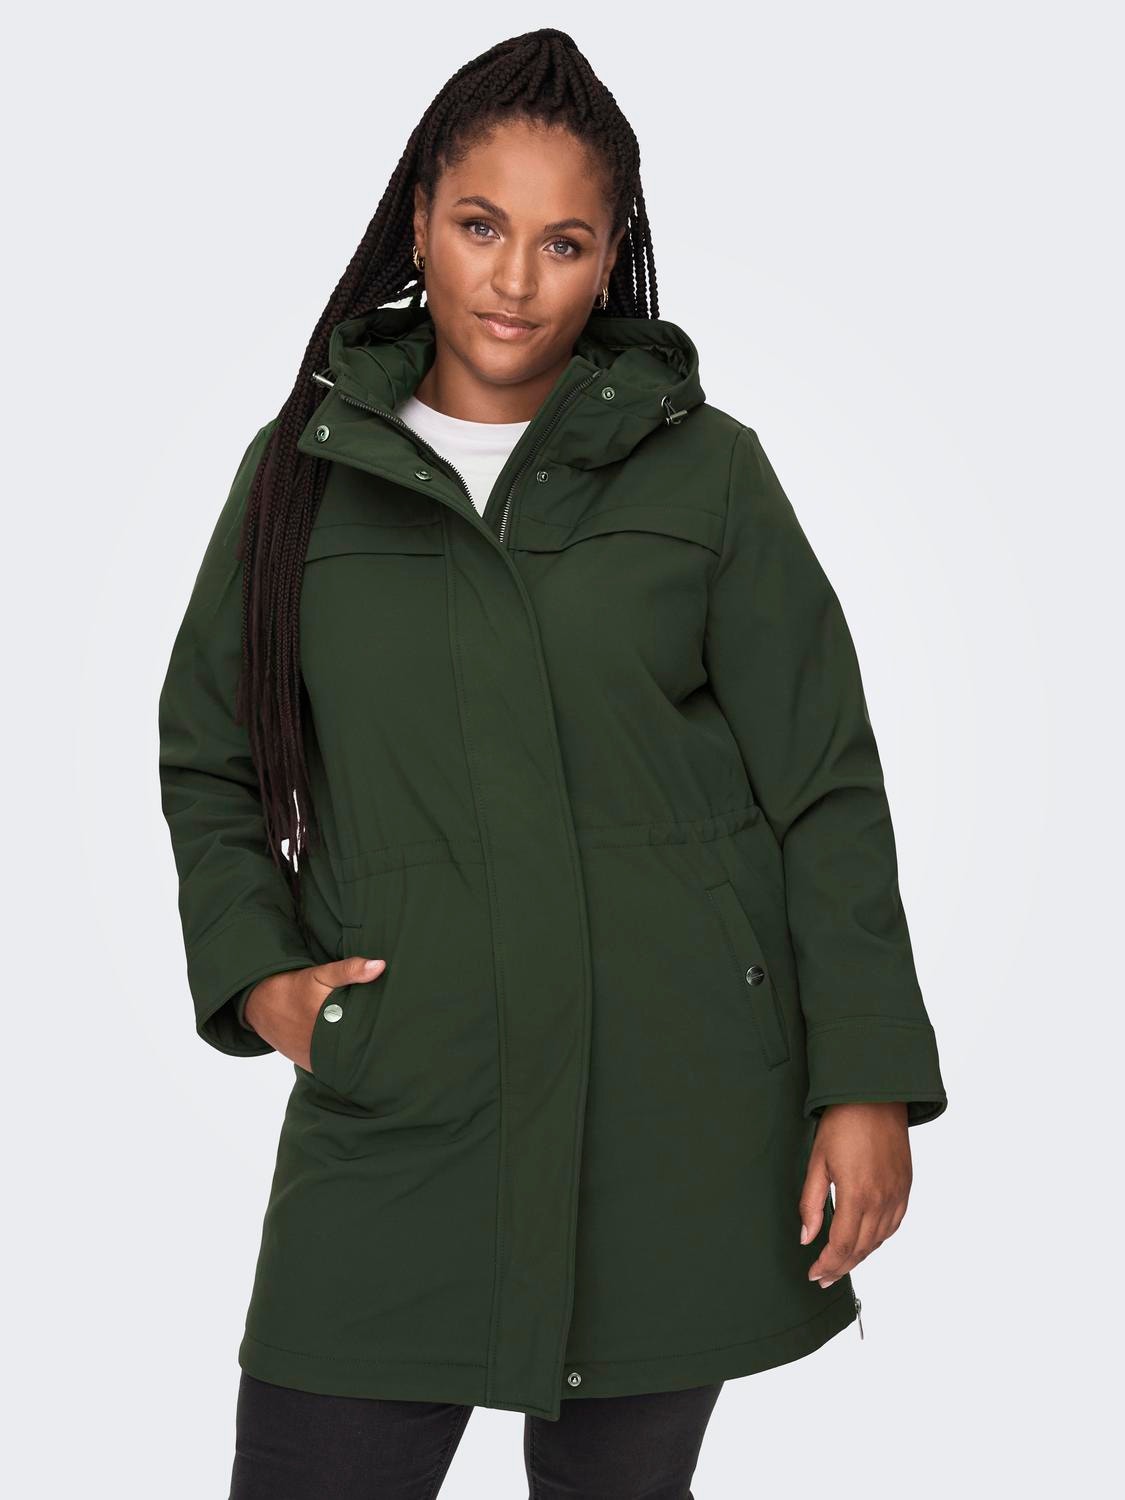 ONLY Curvy 2-layer Jacket -Peat - 15245893